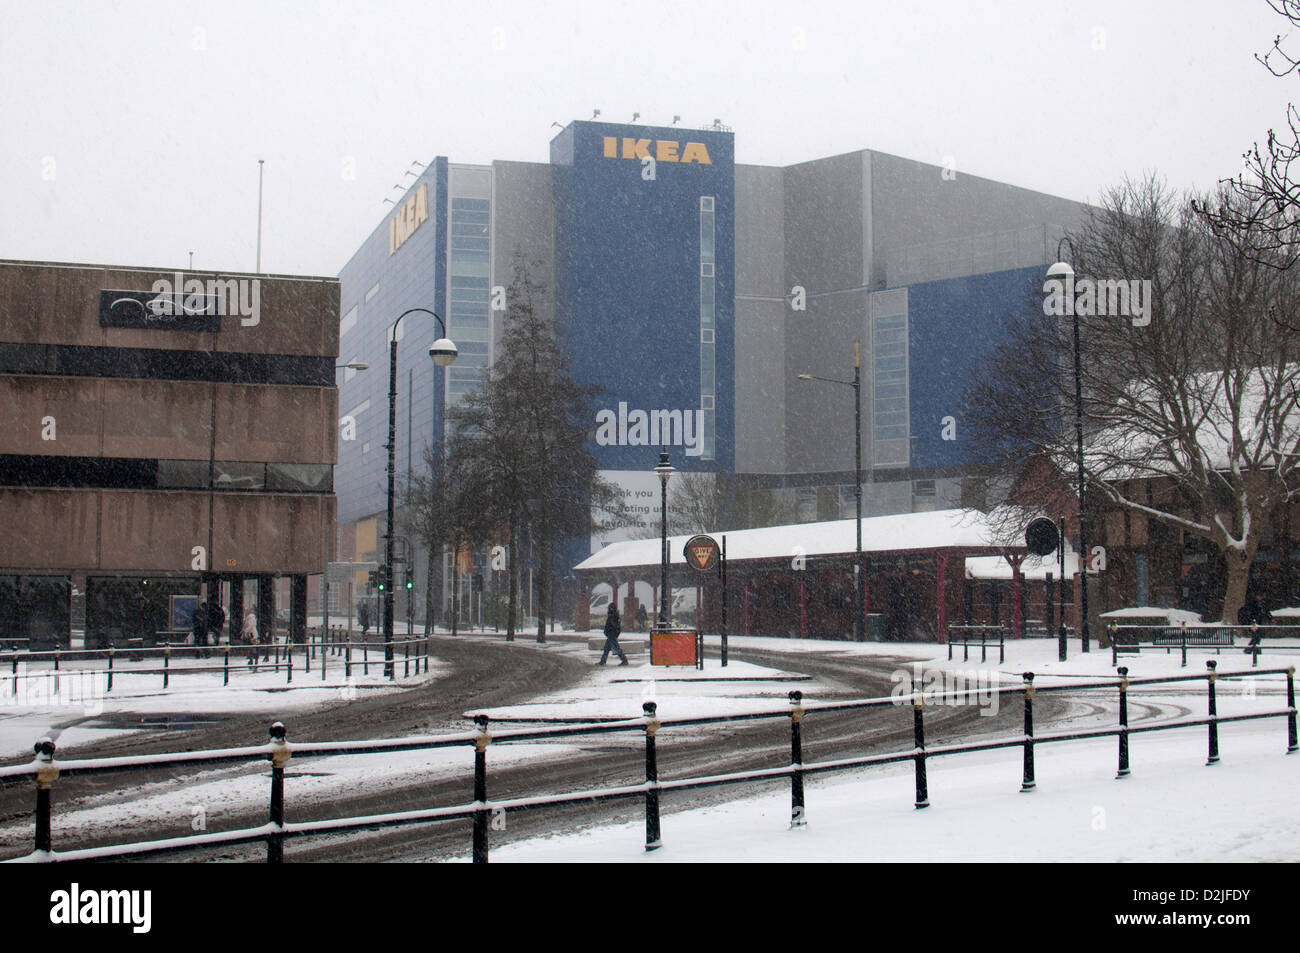 Ikea store in snowy weather, Coventry, UK Stock Photo